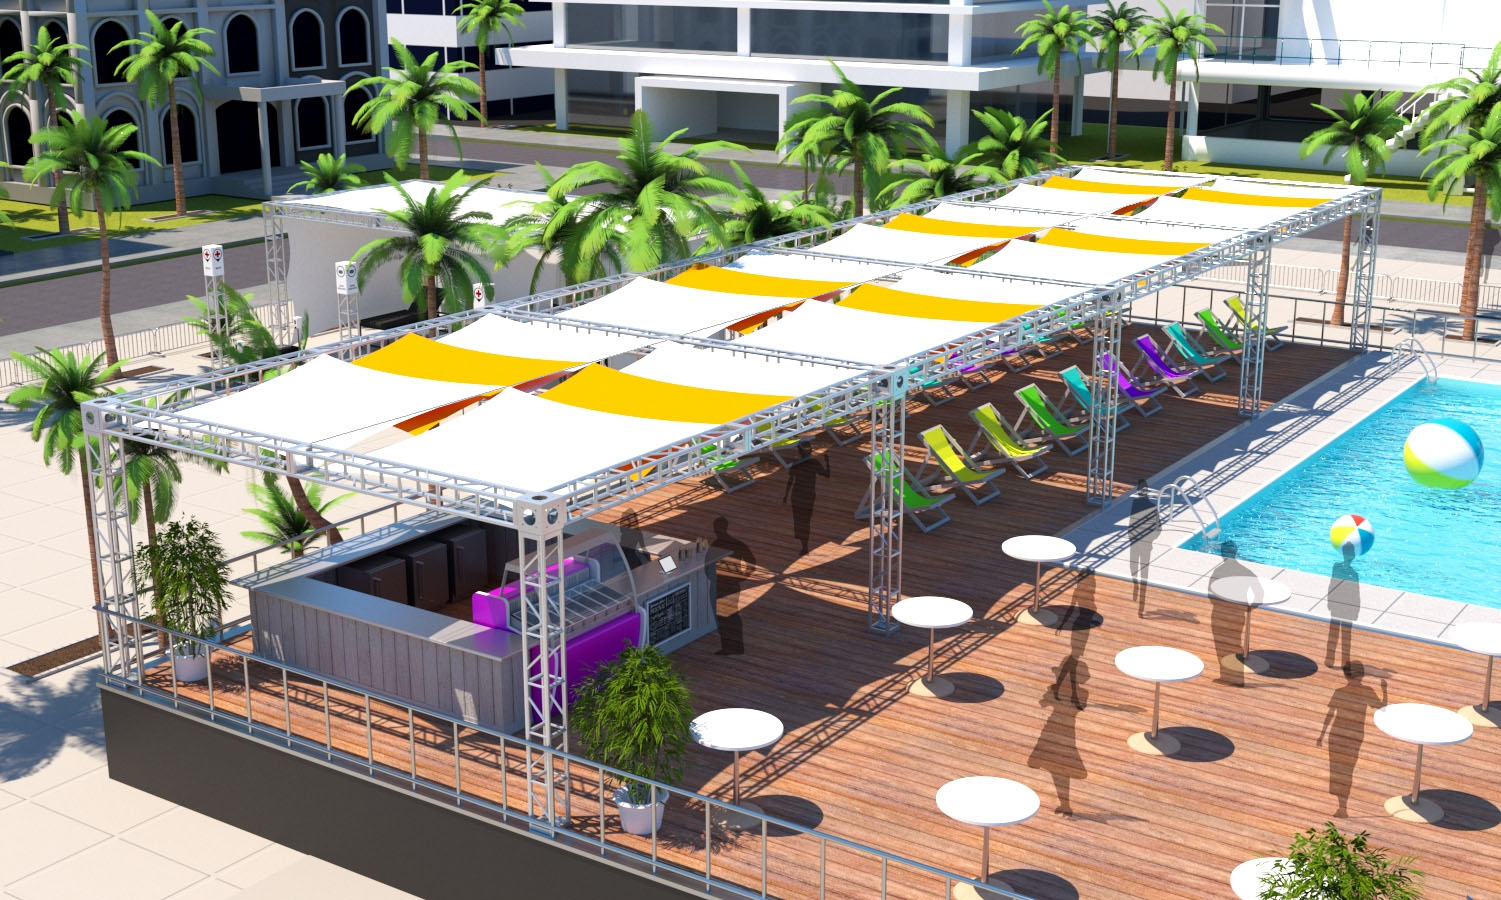 VIP area that provides event shade using a truss structure at a music festival